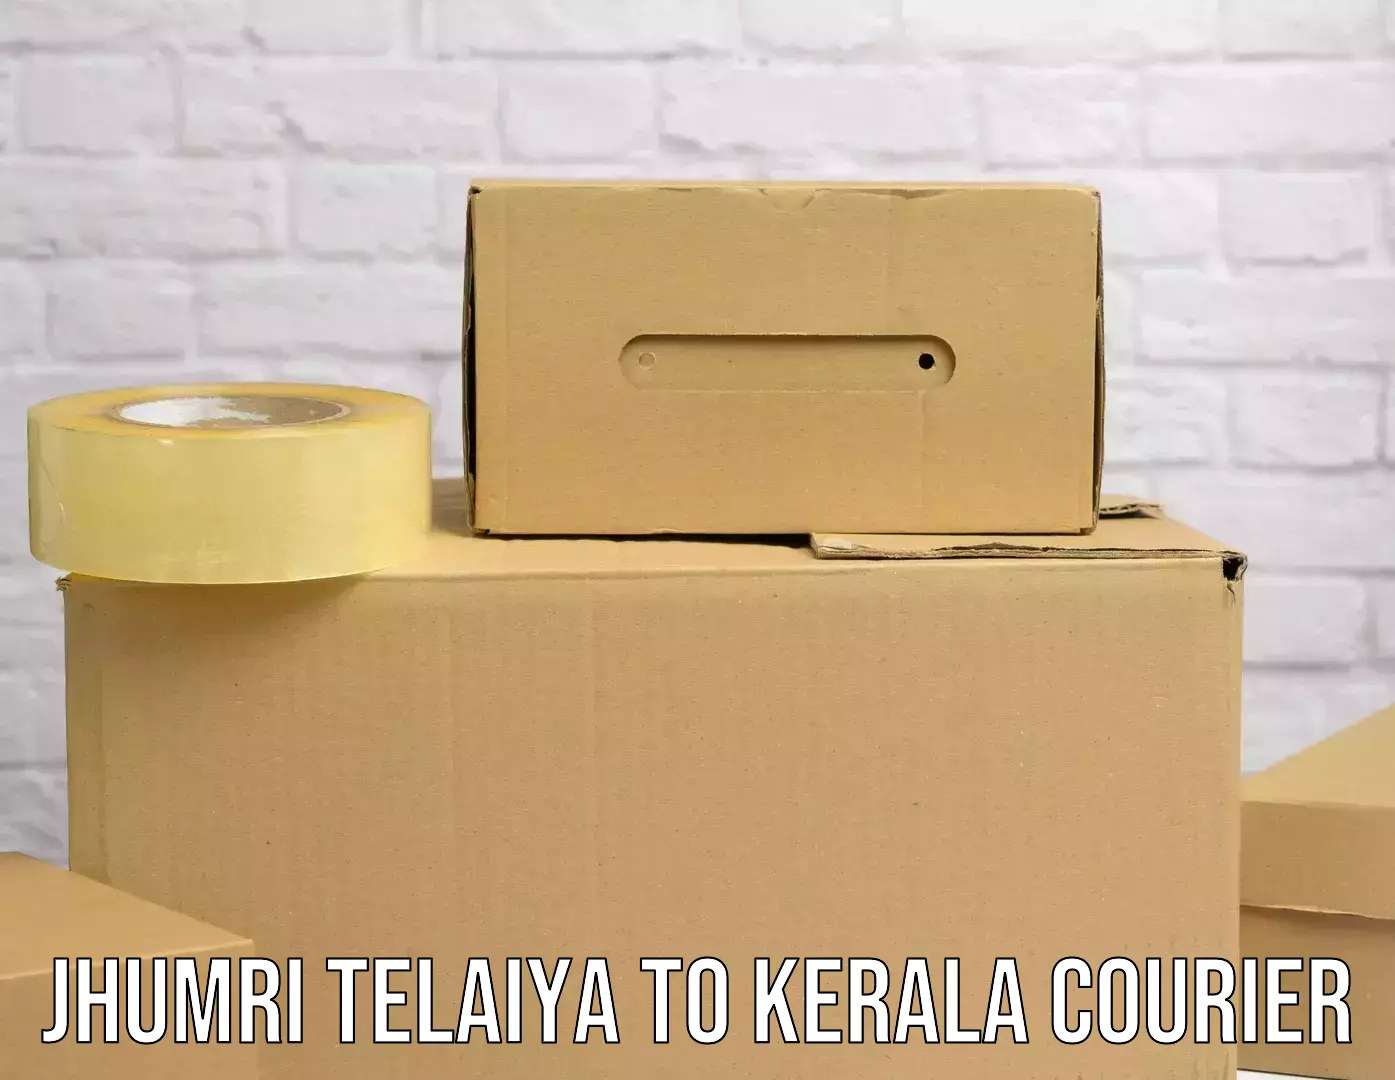 Quality courier services Jhumri Telaiya to Chengannur